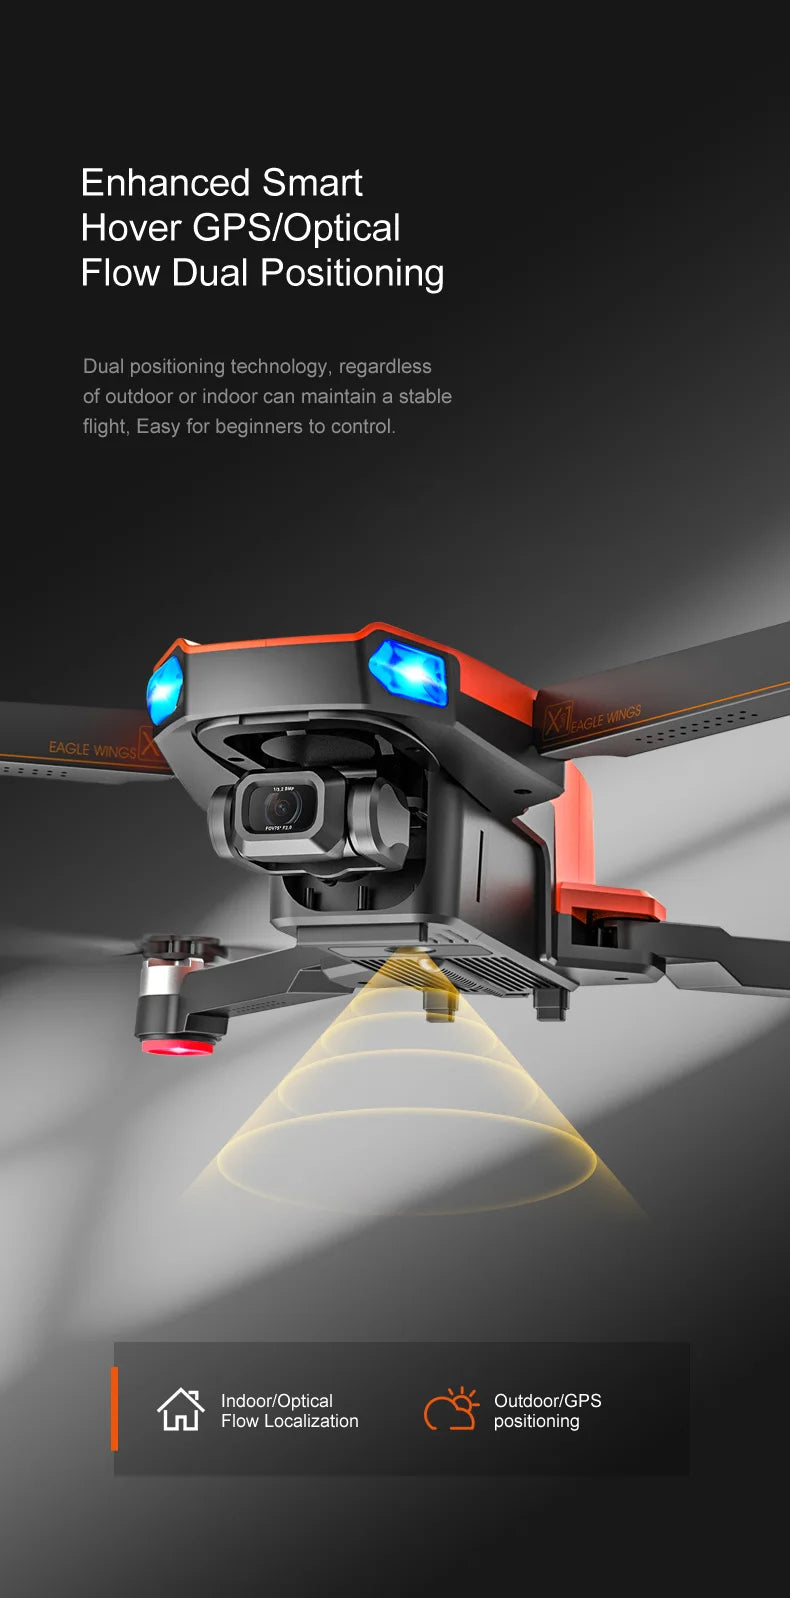 MS-712 drone, Enhanced Smart Hover GPSIOptical Flow Dual Positioning . Easy for beginners